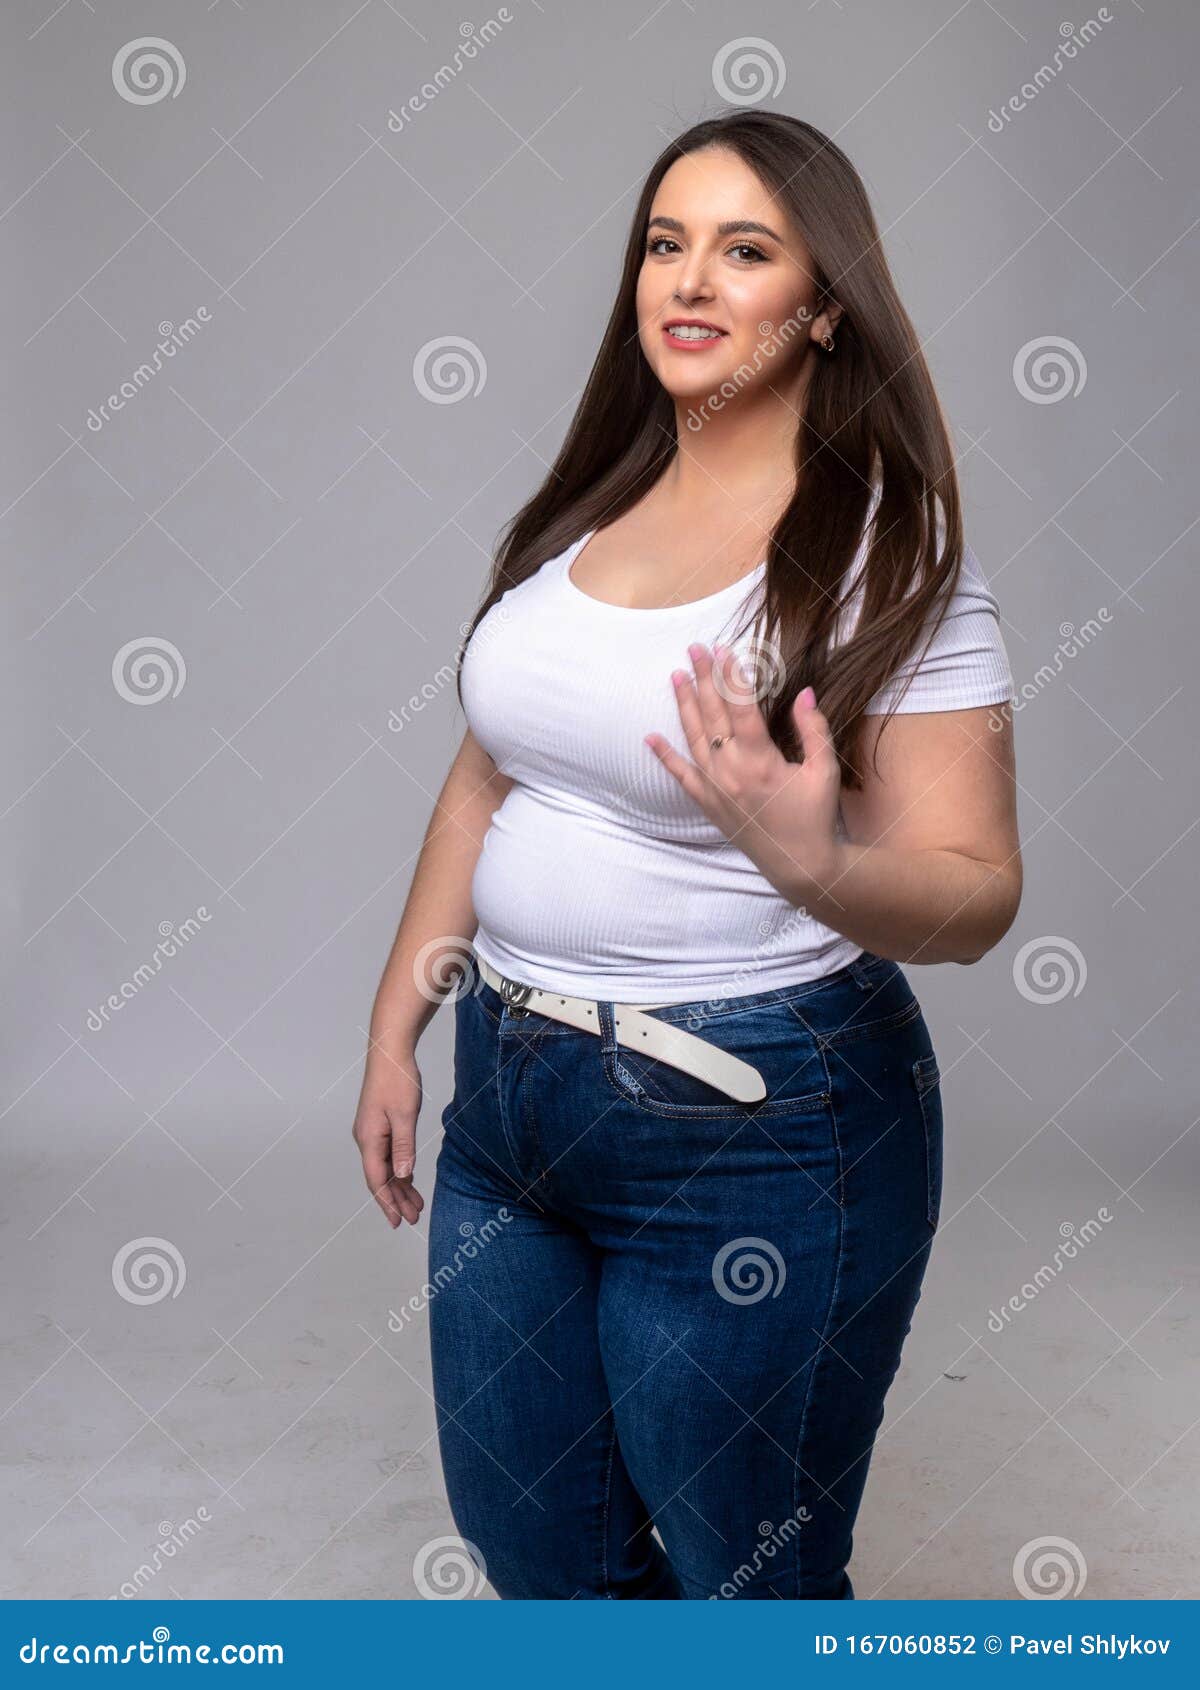 Hindre munching Pilgrim Plus Size Model with Long Hair in Studio Stock Photo - Image of young,  people: 167060852